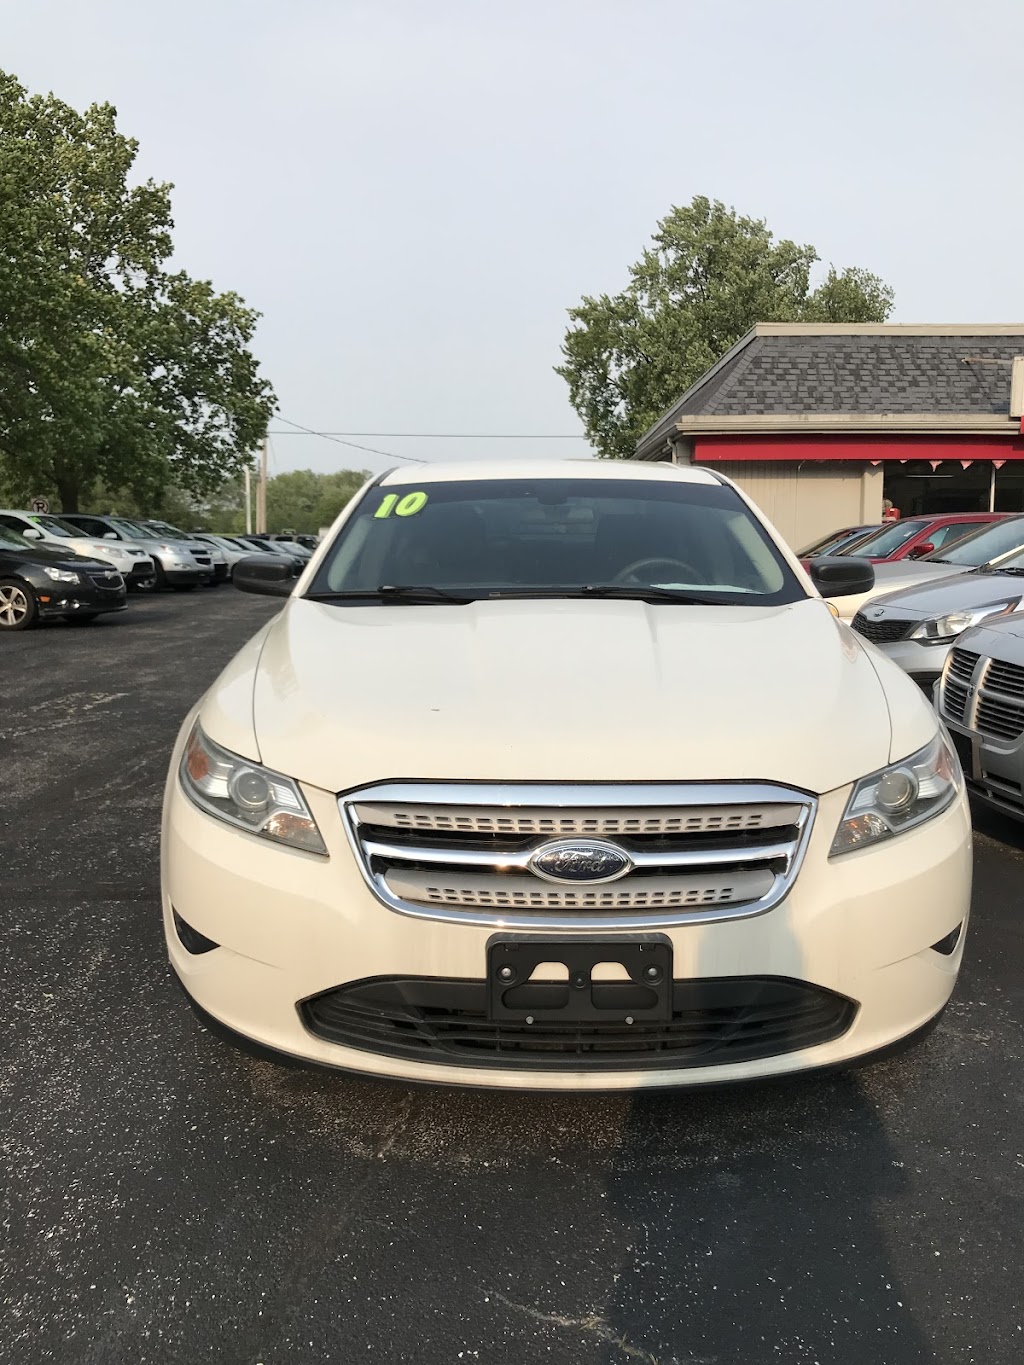 Coveys Auto Sales | 1101 First St, Huntington, IN 46750, USA | Phone: (260) 356-9447